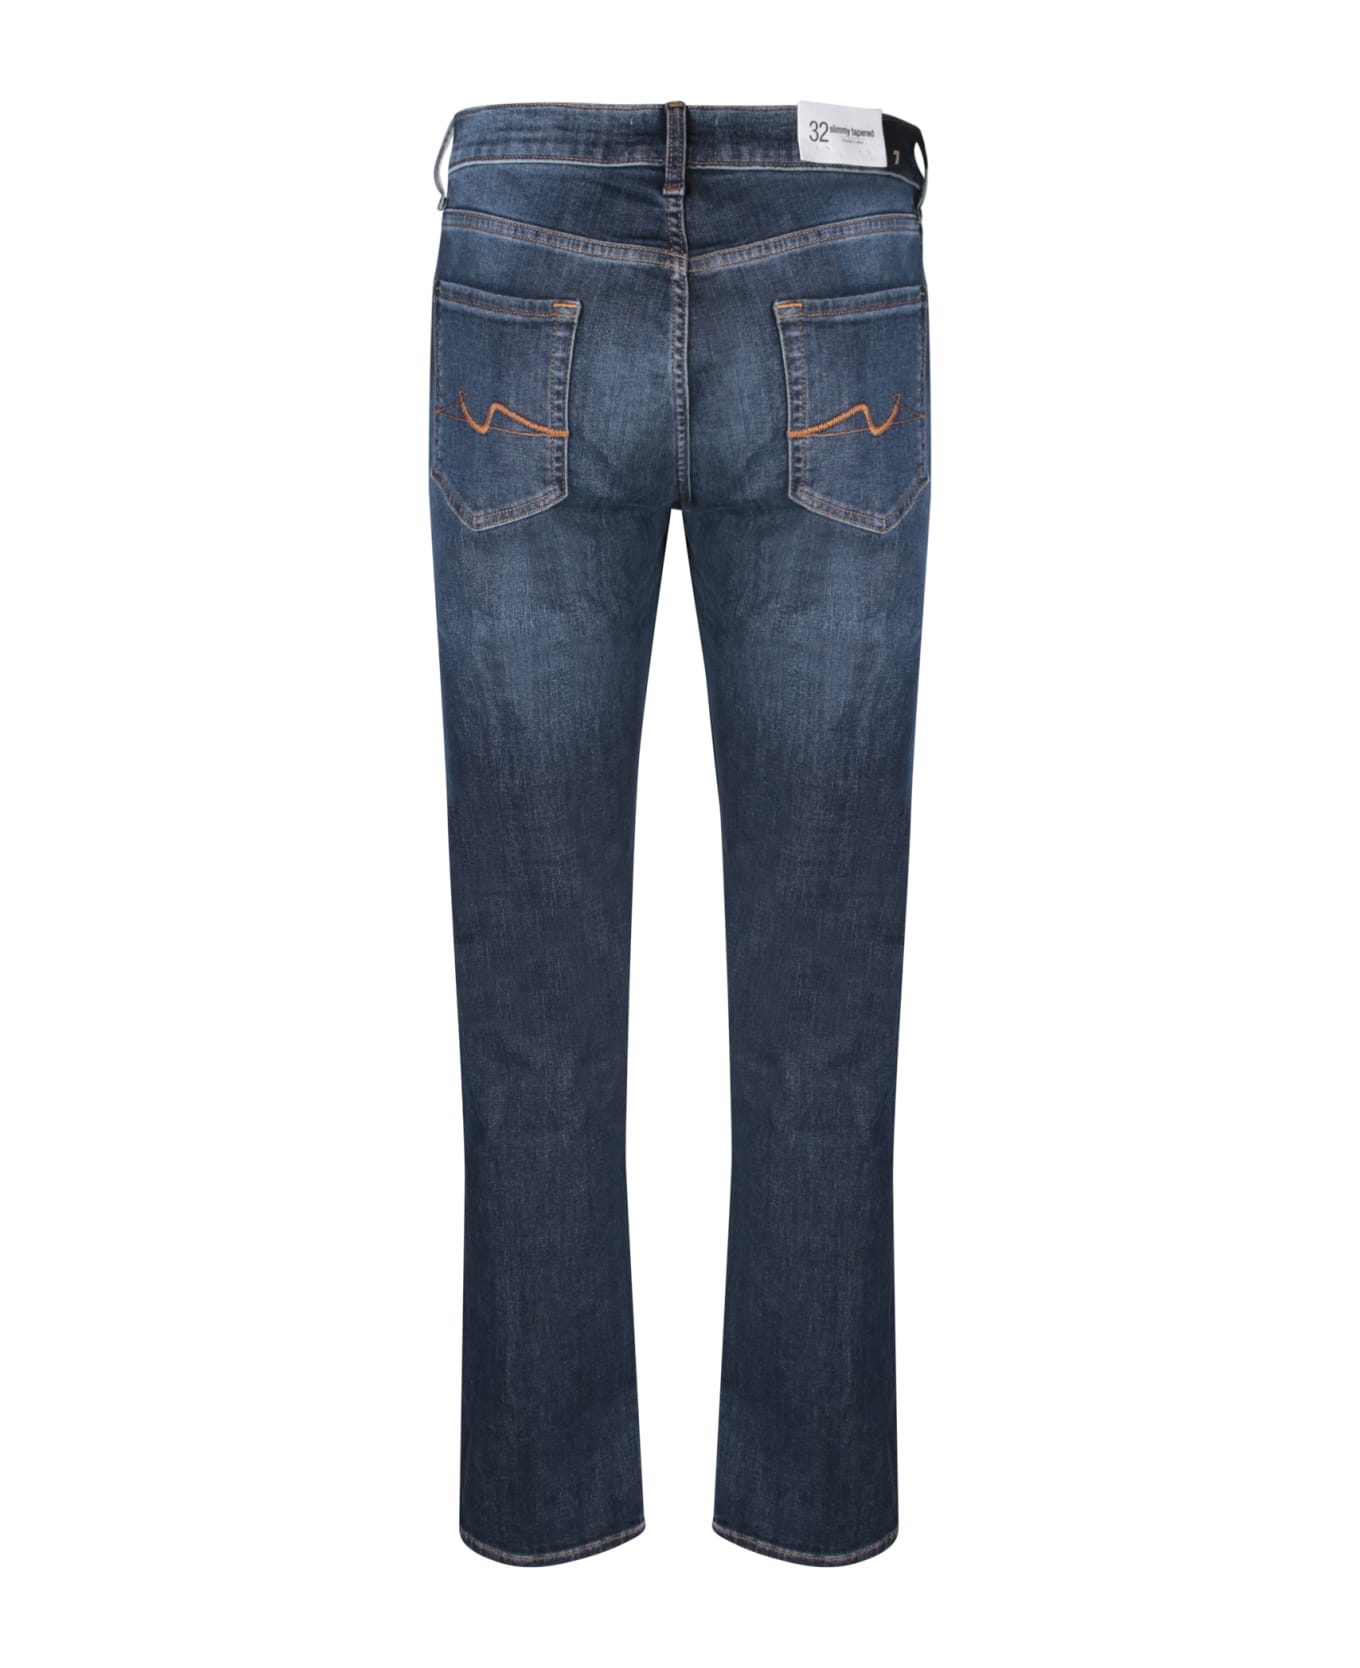 7 For All Mankind Slimmy Tapered Dark Blue Jeans - Blue デニム